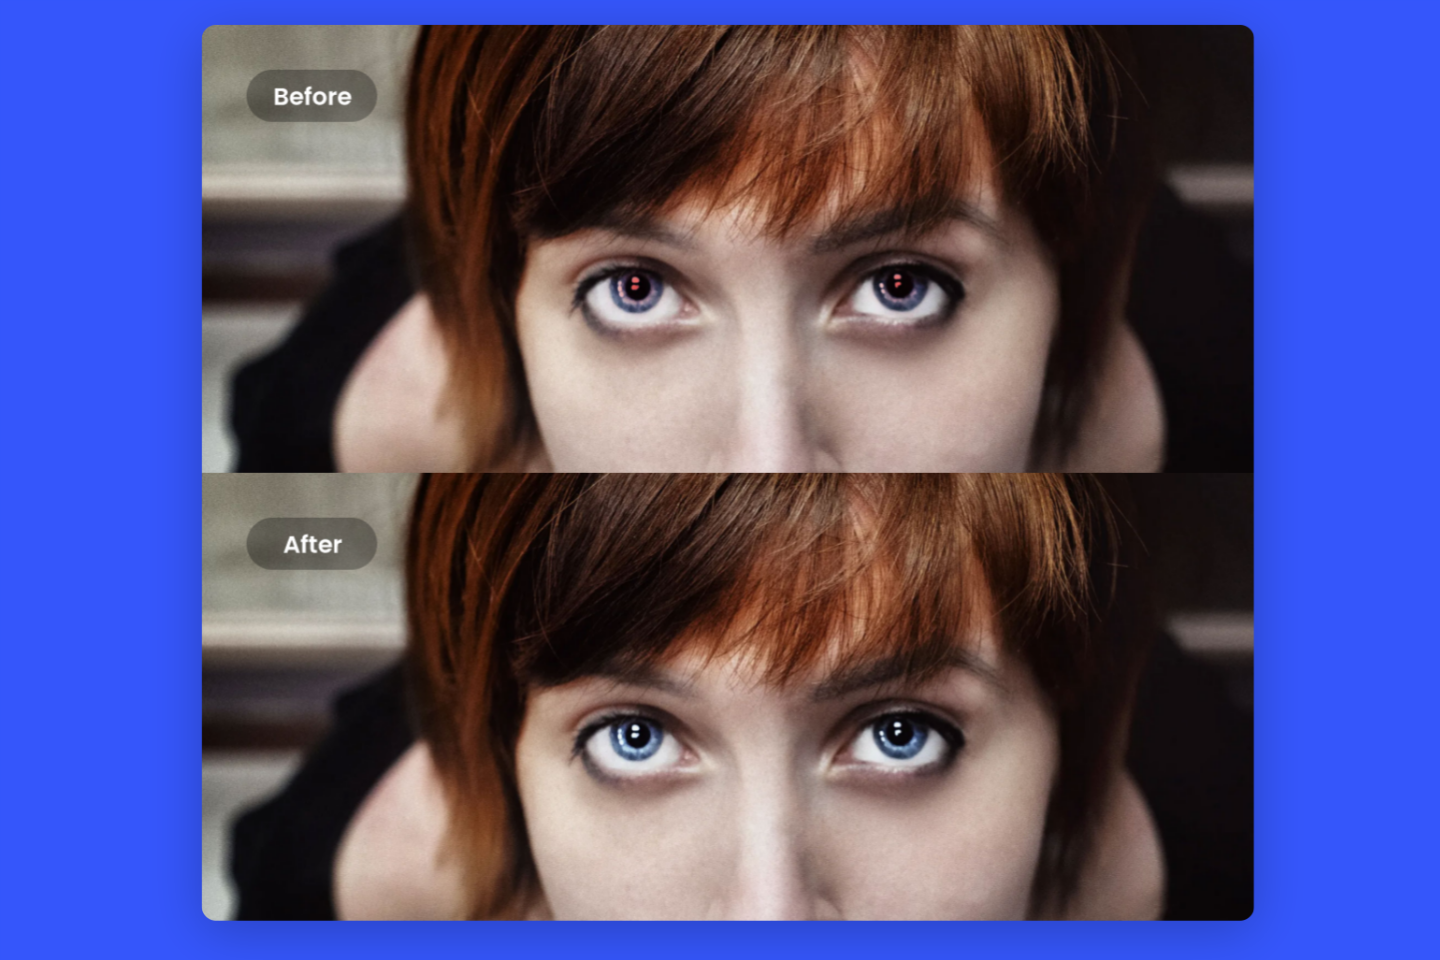 A girl with short brown hair and the above one has eyes with red light and the below one has no red eye